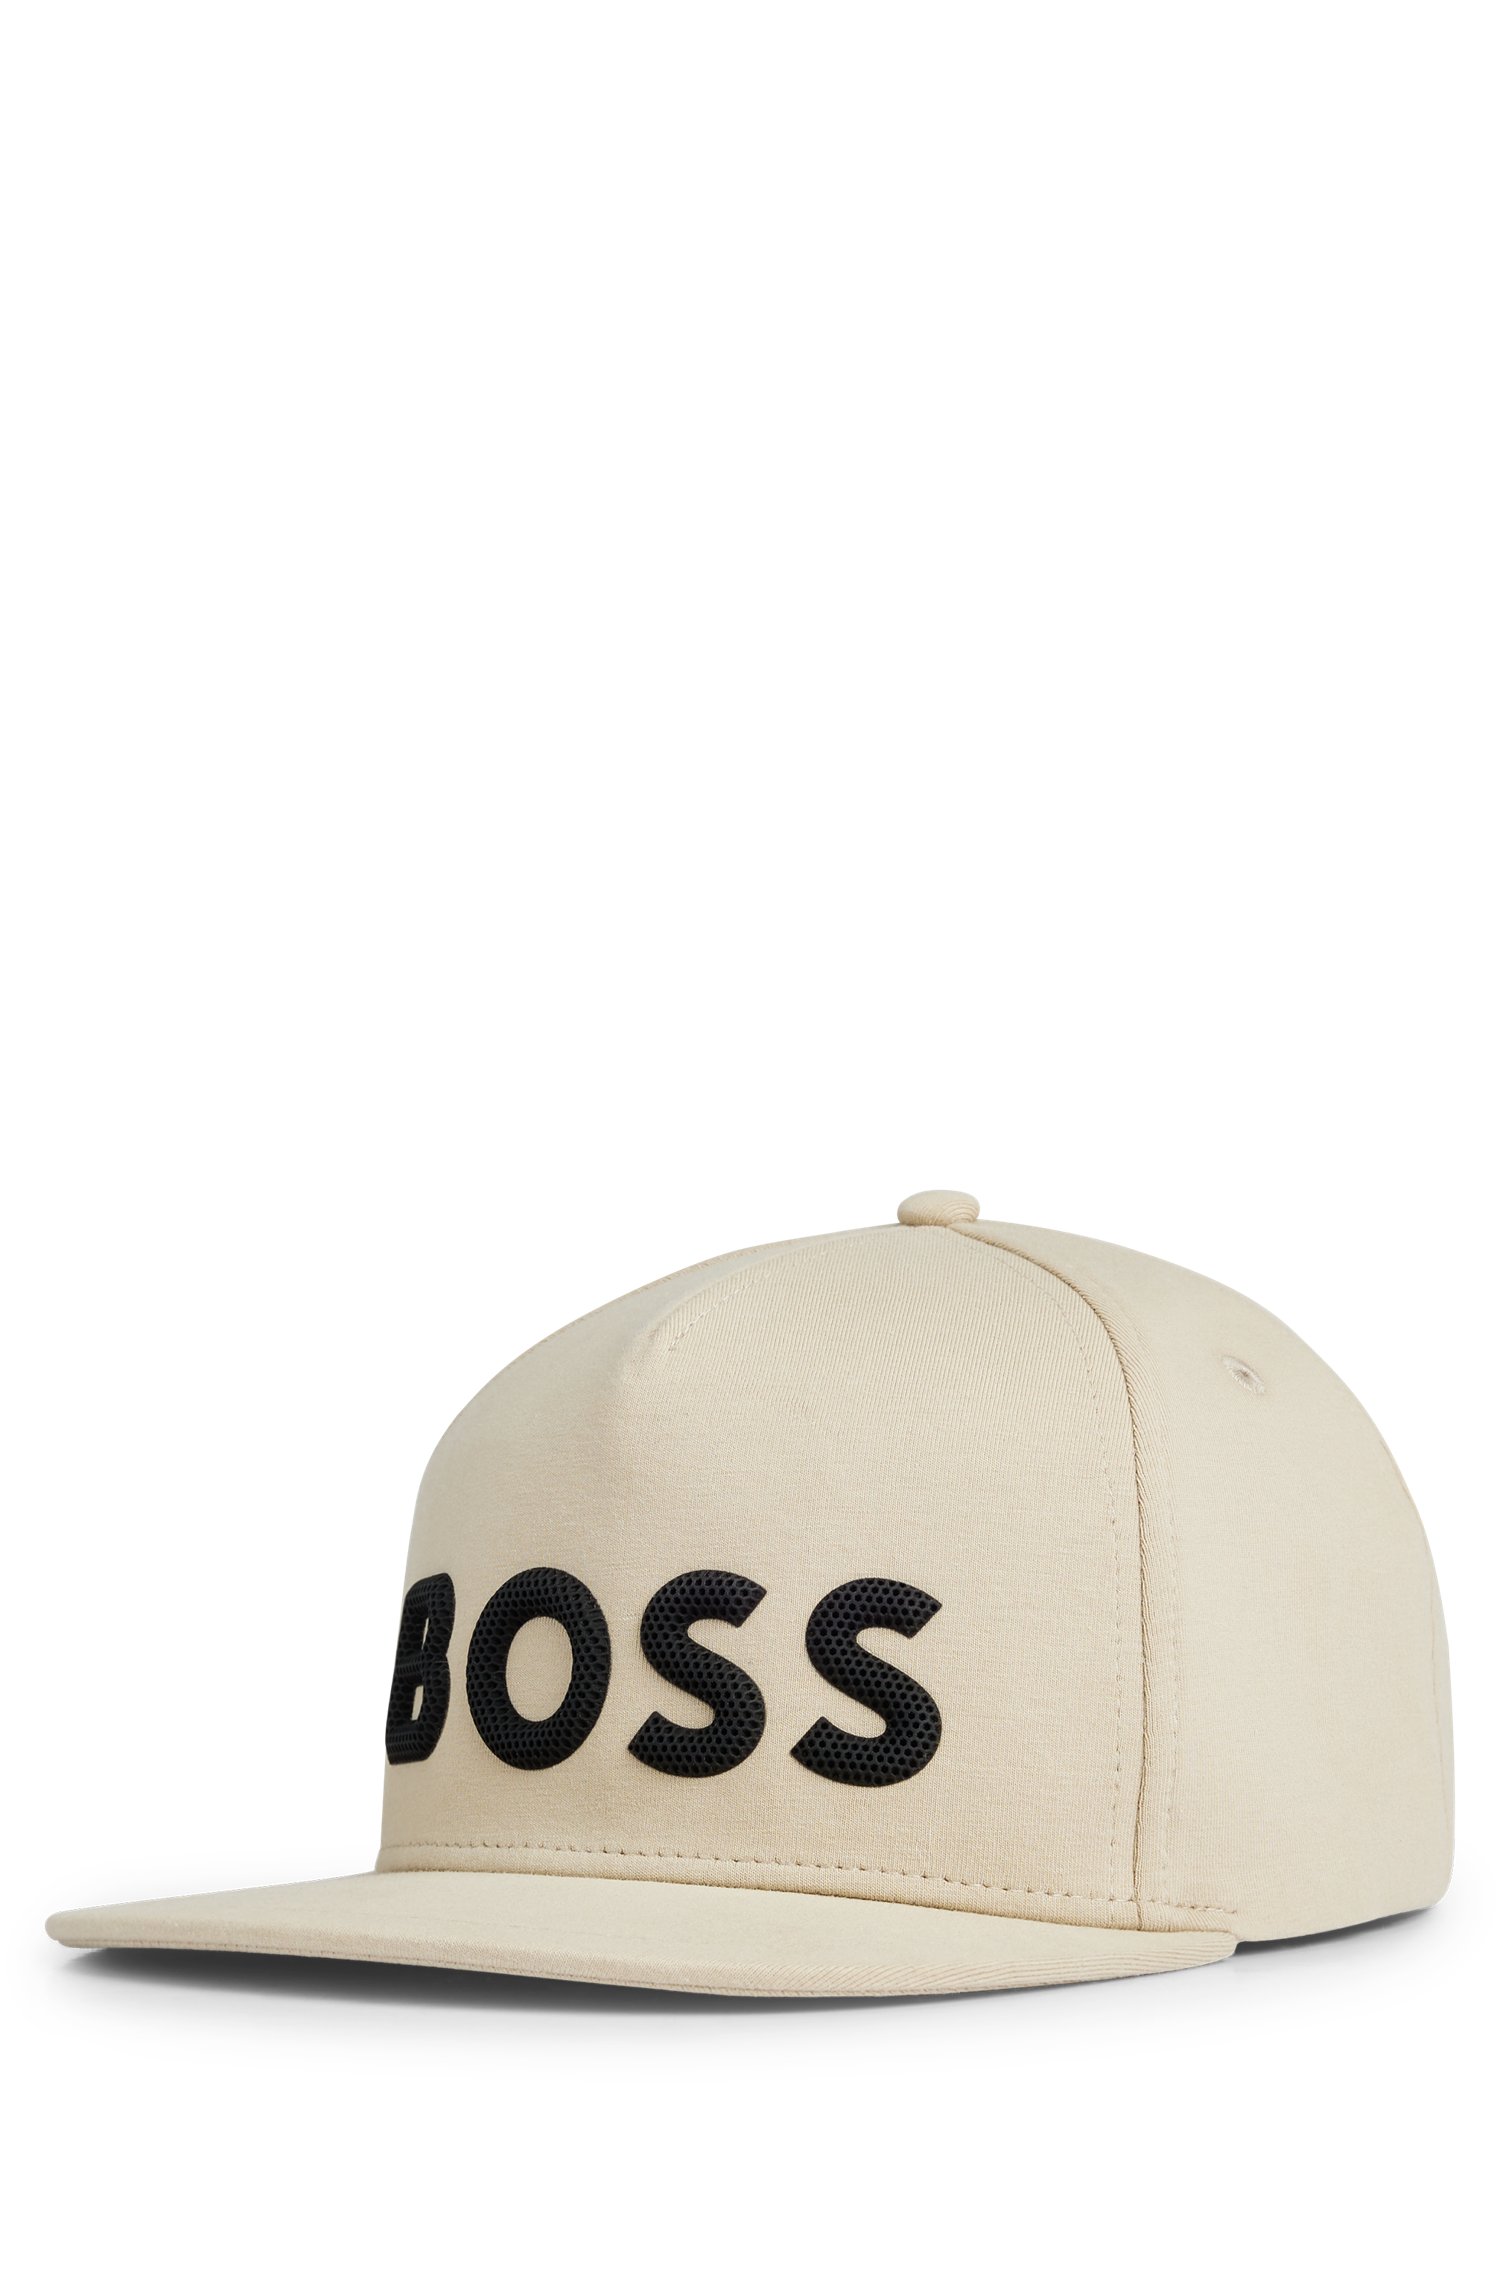 Five-panel cap with honeycomb logo detail